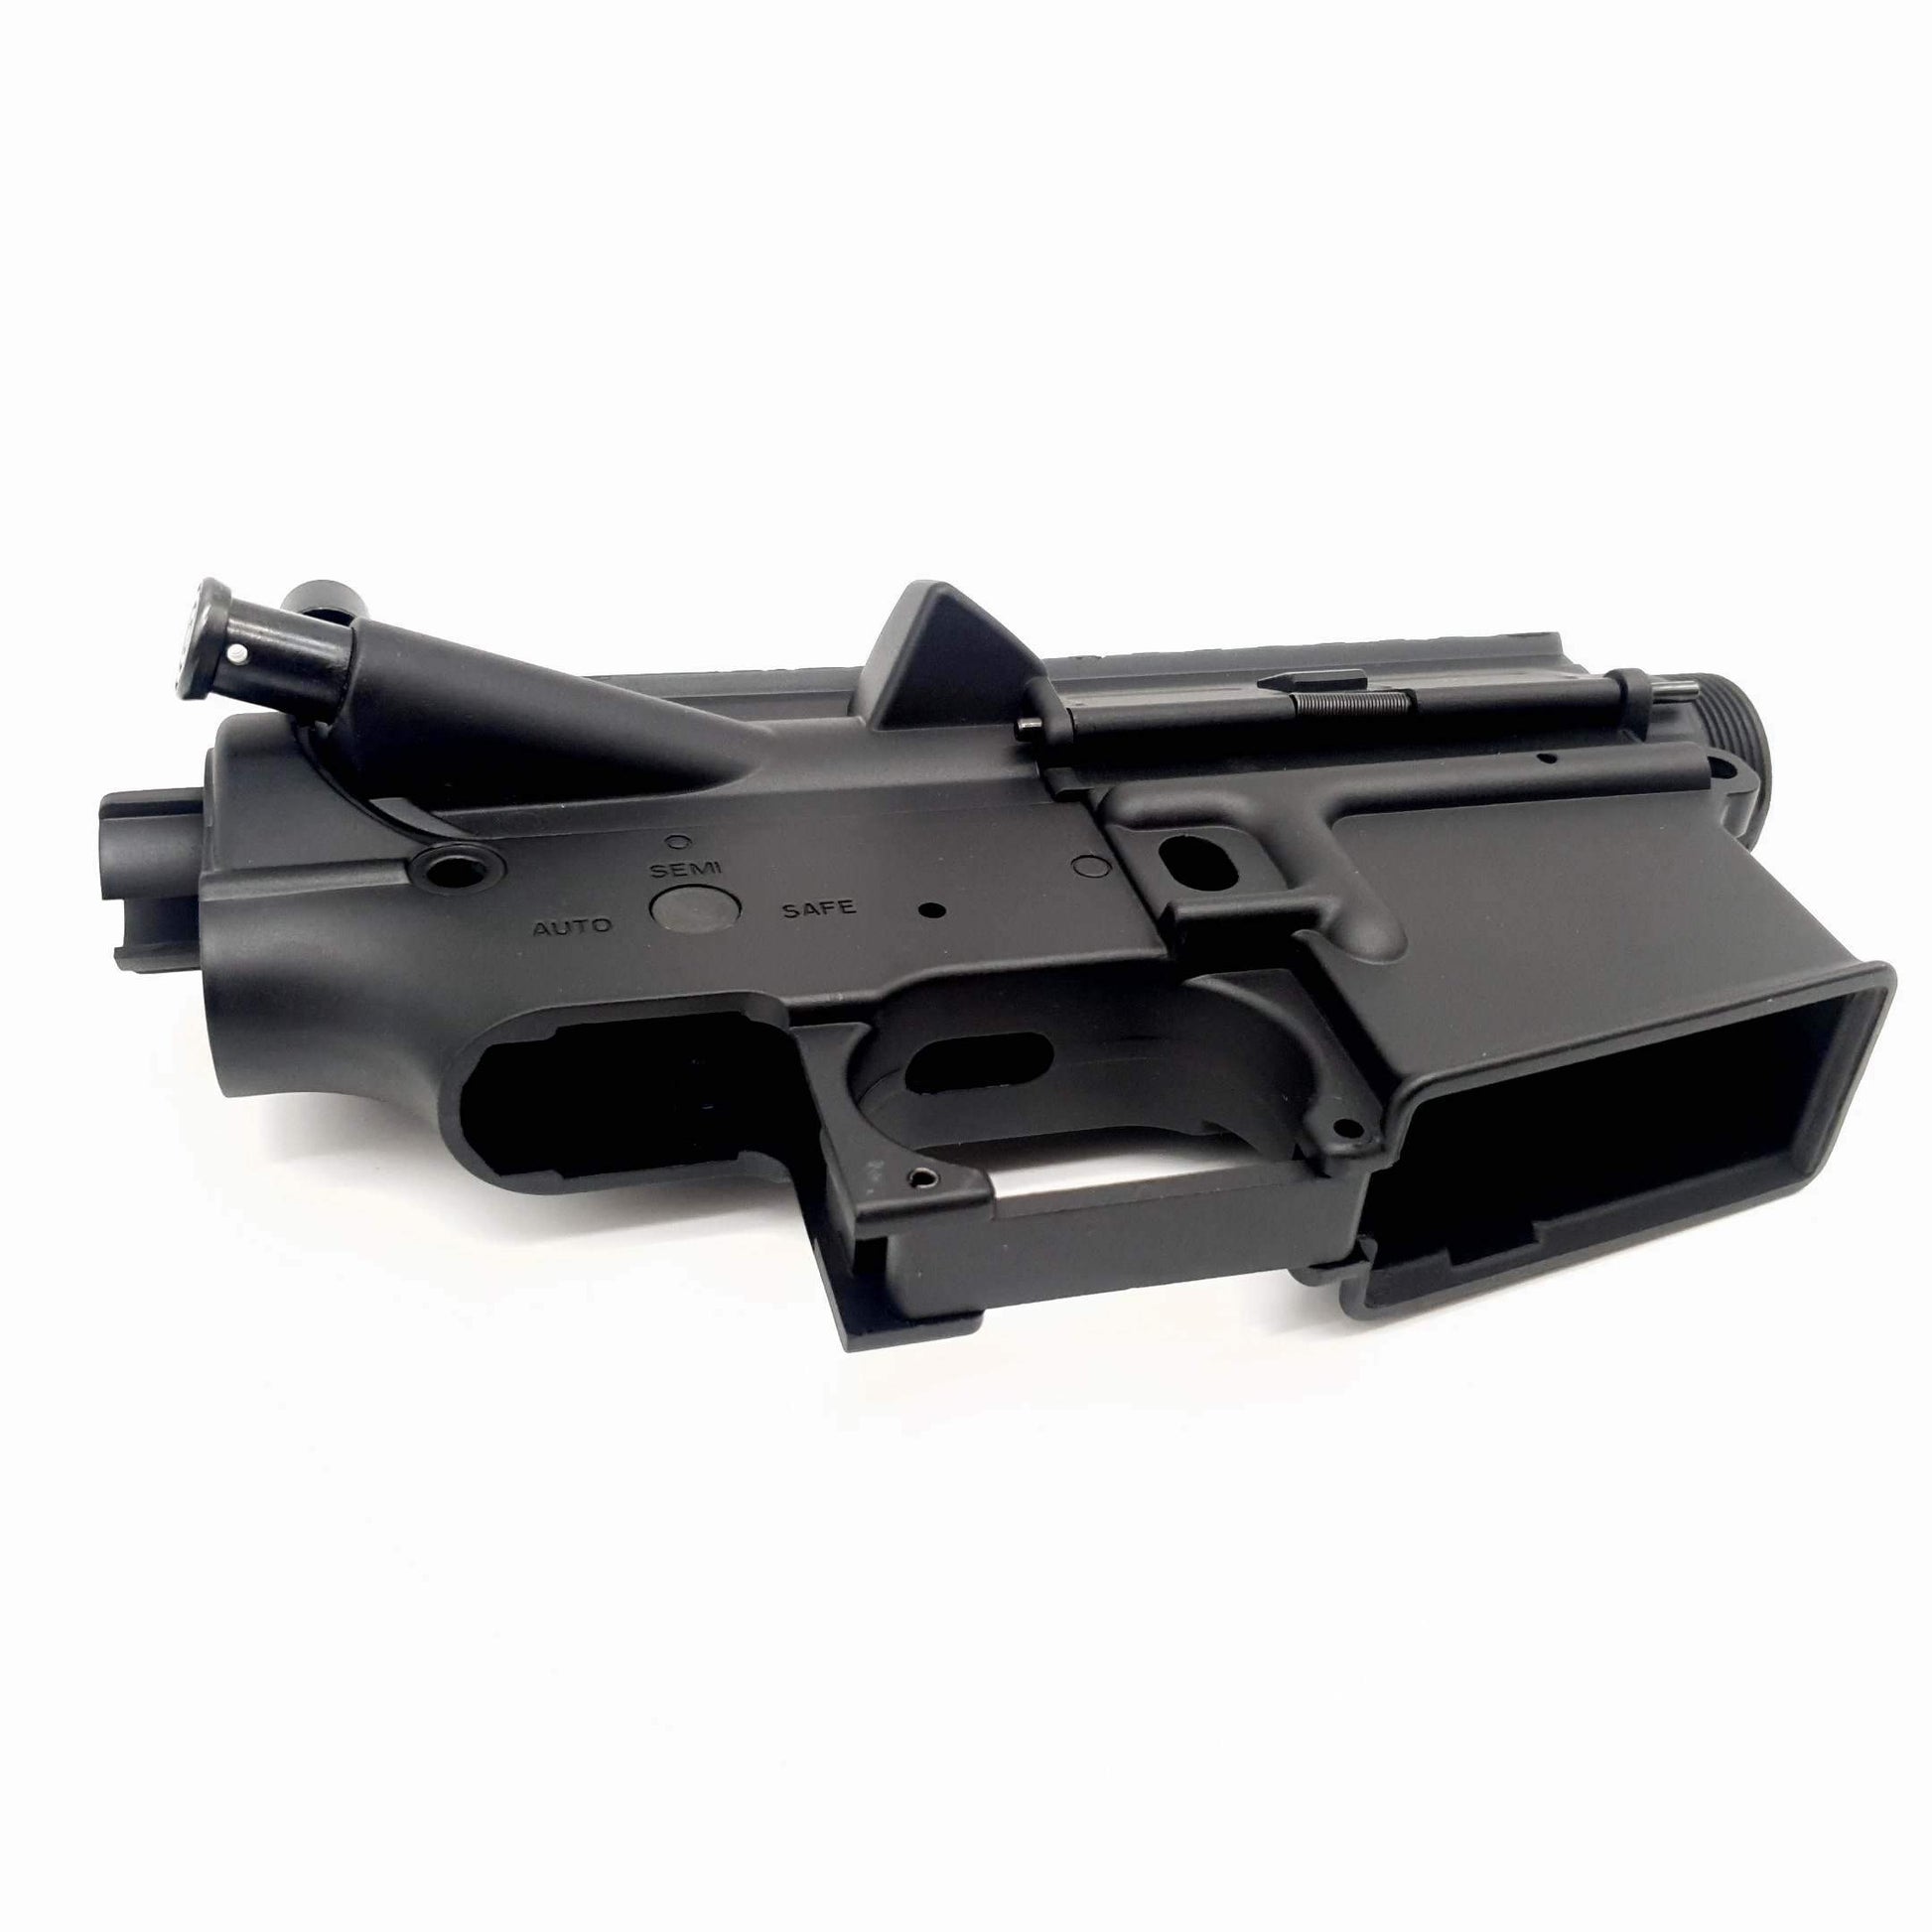 Wells M4 Metal Receiver Set- Gel Blaster Parts & Accessories For Sale - Sting Ops Tactical